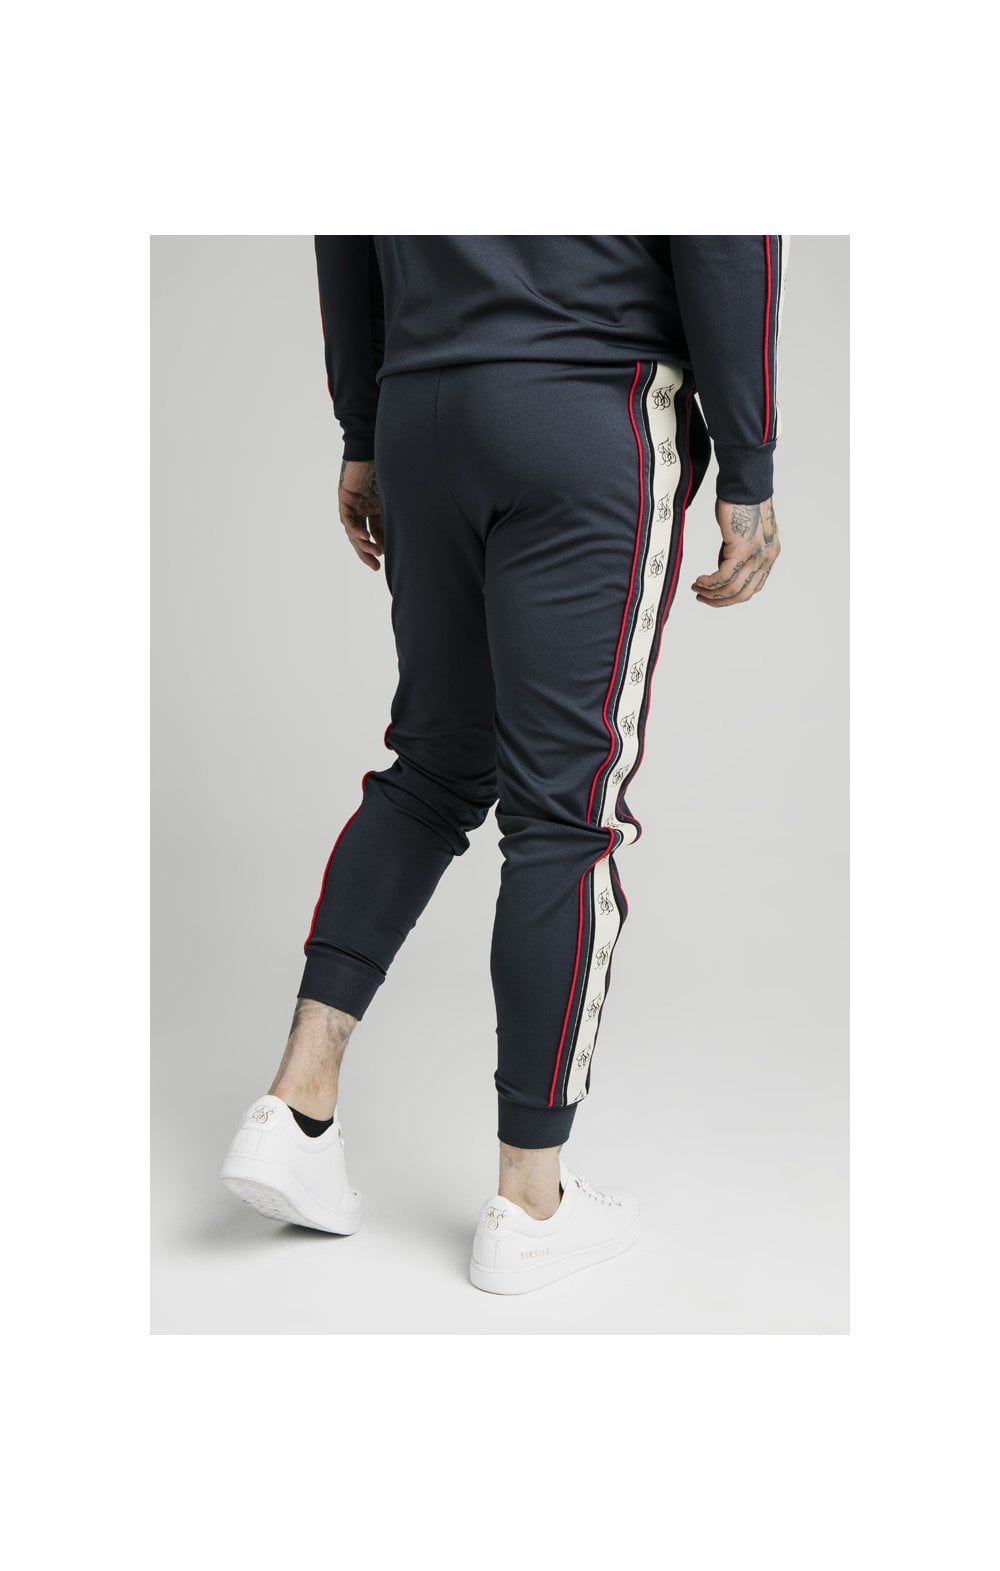 Load image into Gallery viewer, SikSilk Premium Tape Cuffed Pants – Navy (2)